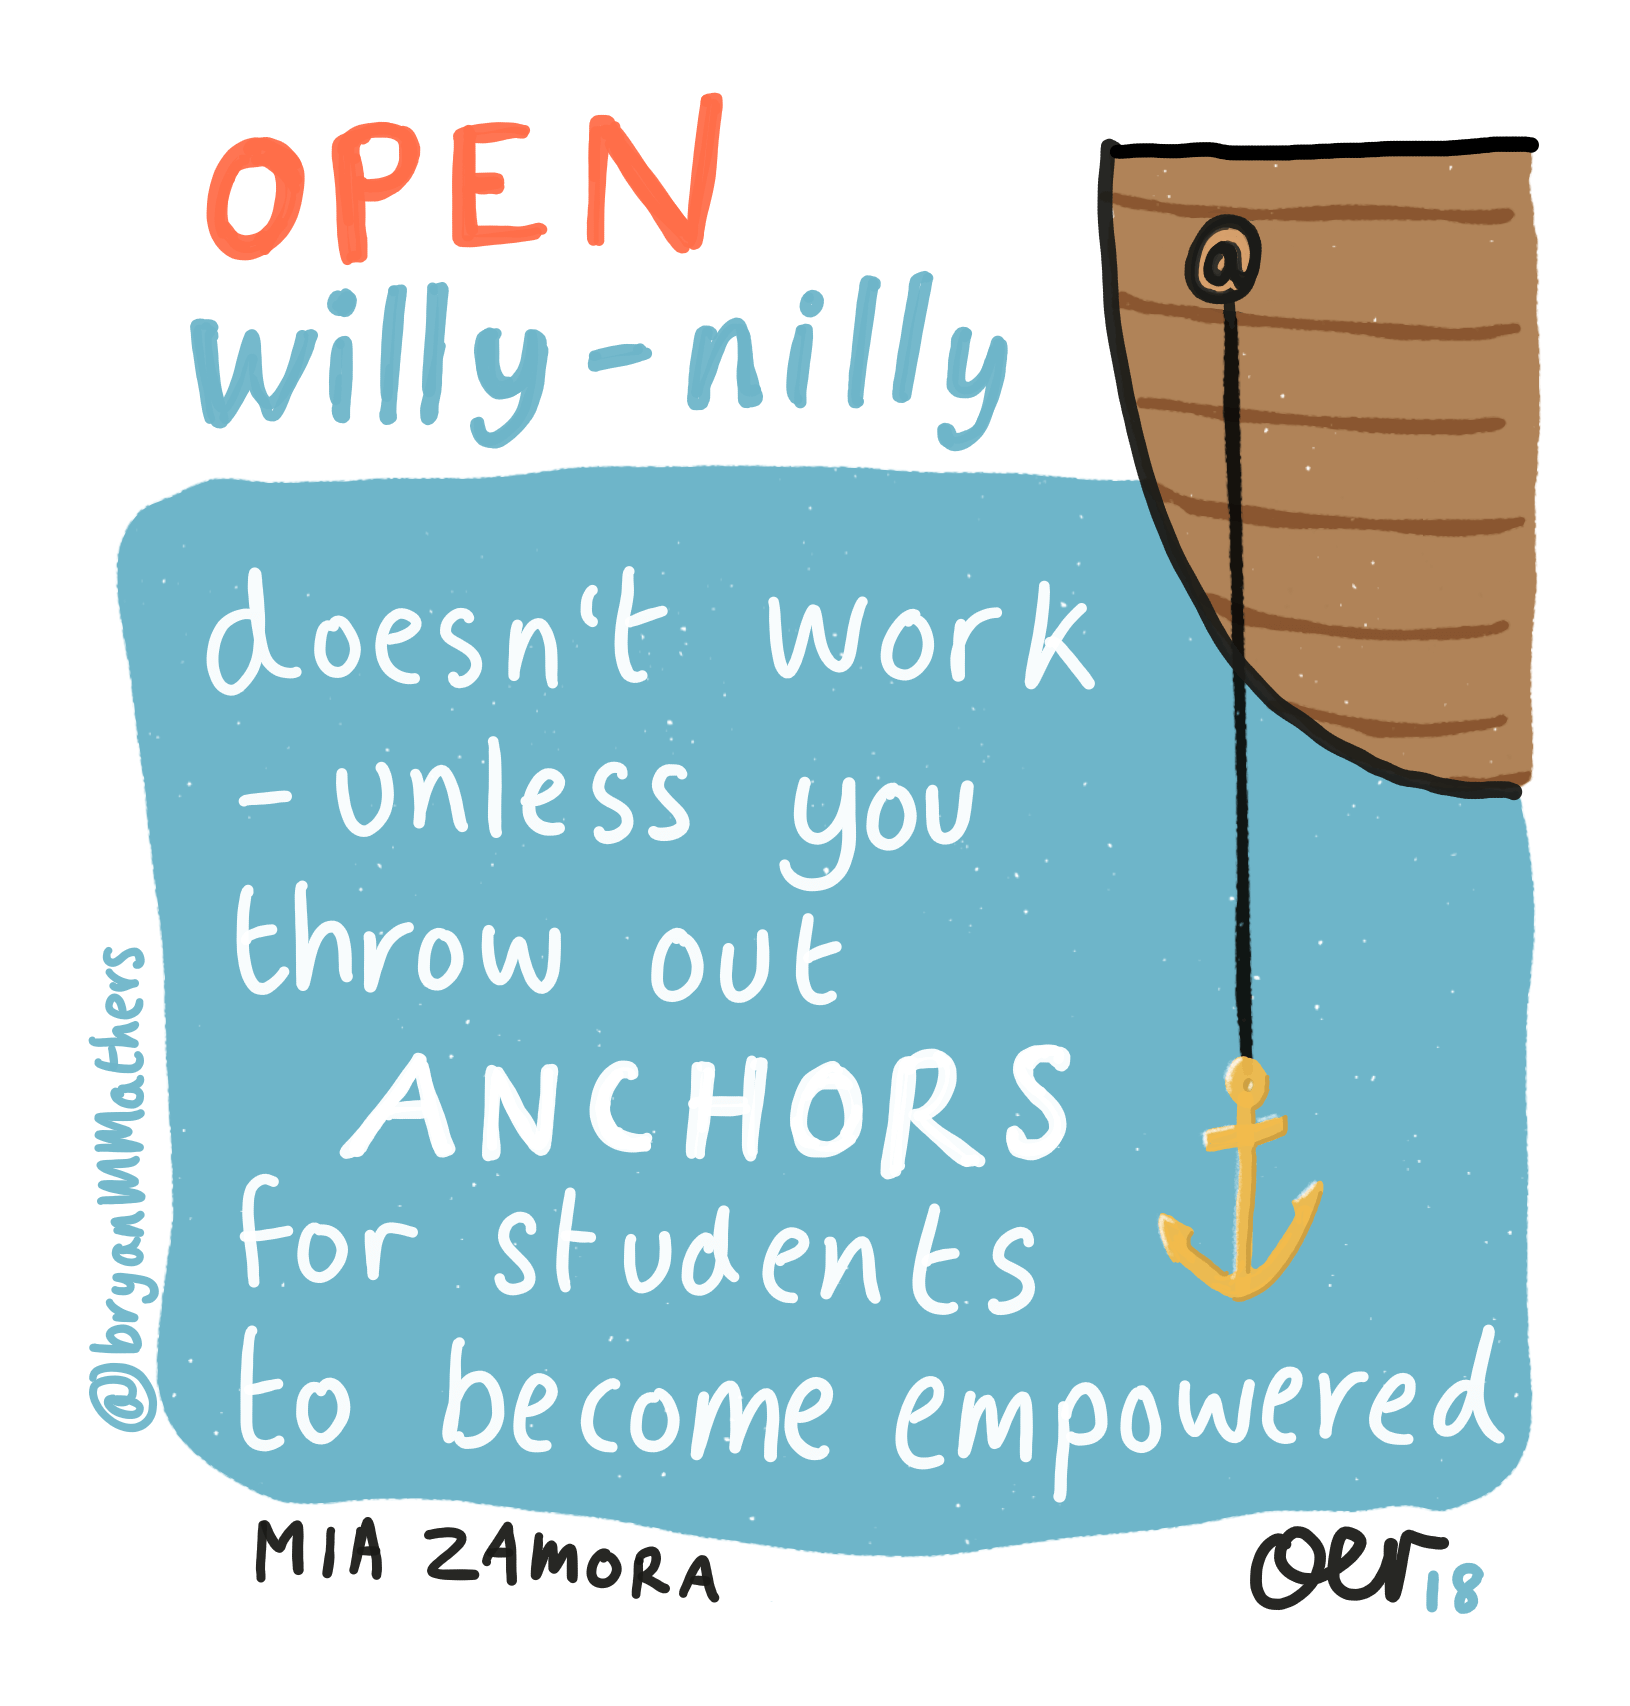 Open willy-nilly